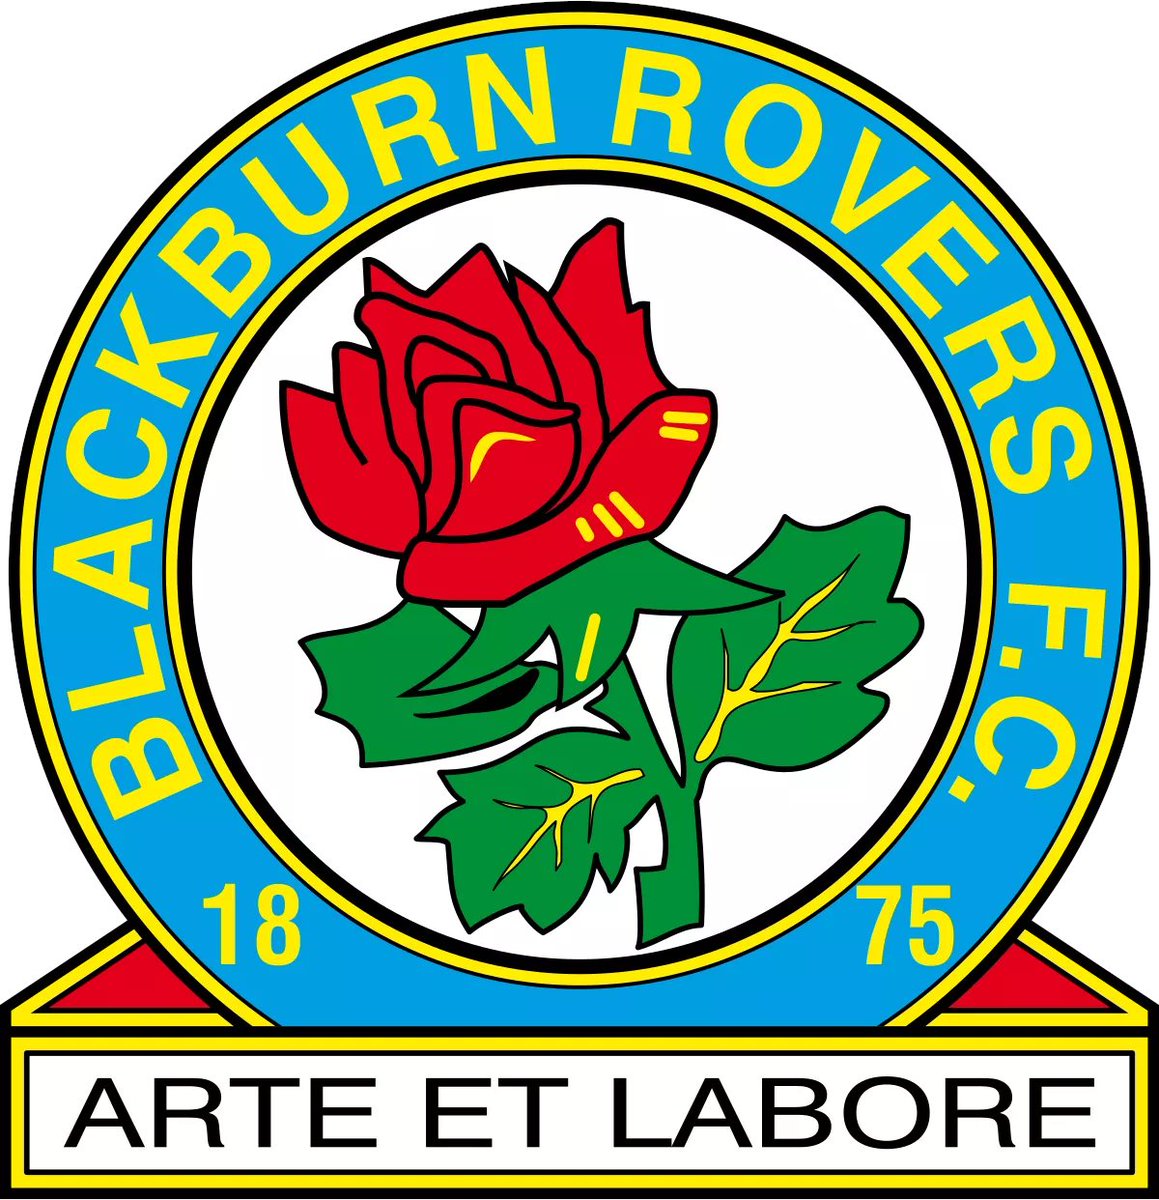 72) Blackburn Rovers Points: 93 Manager: Gareth Ainsworth Blackburn are wild. There best player is a Greek international who's never played in the U.K. Clearly he was born here, saw Blackburn and decided to make a run for it.